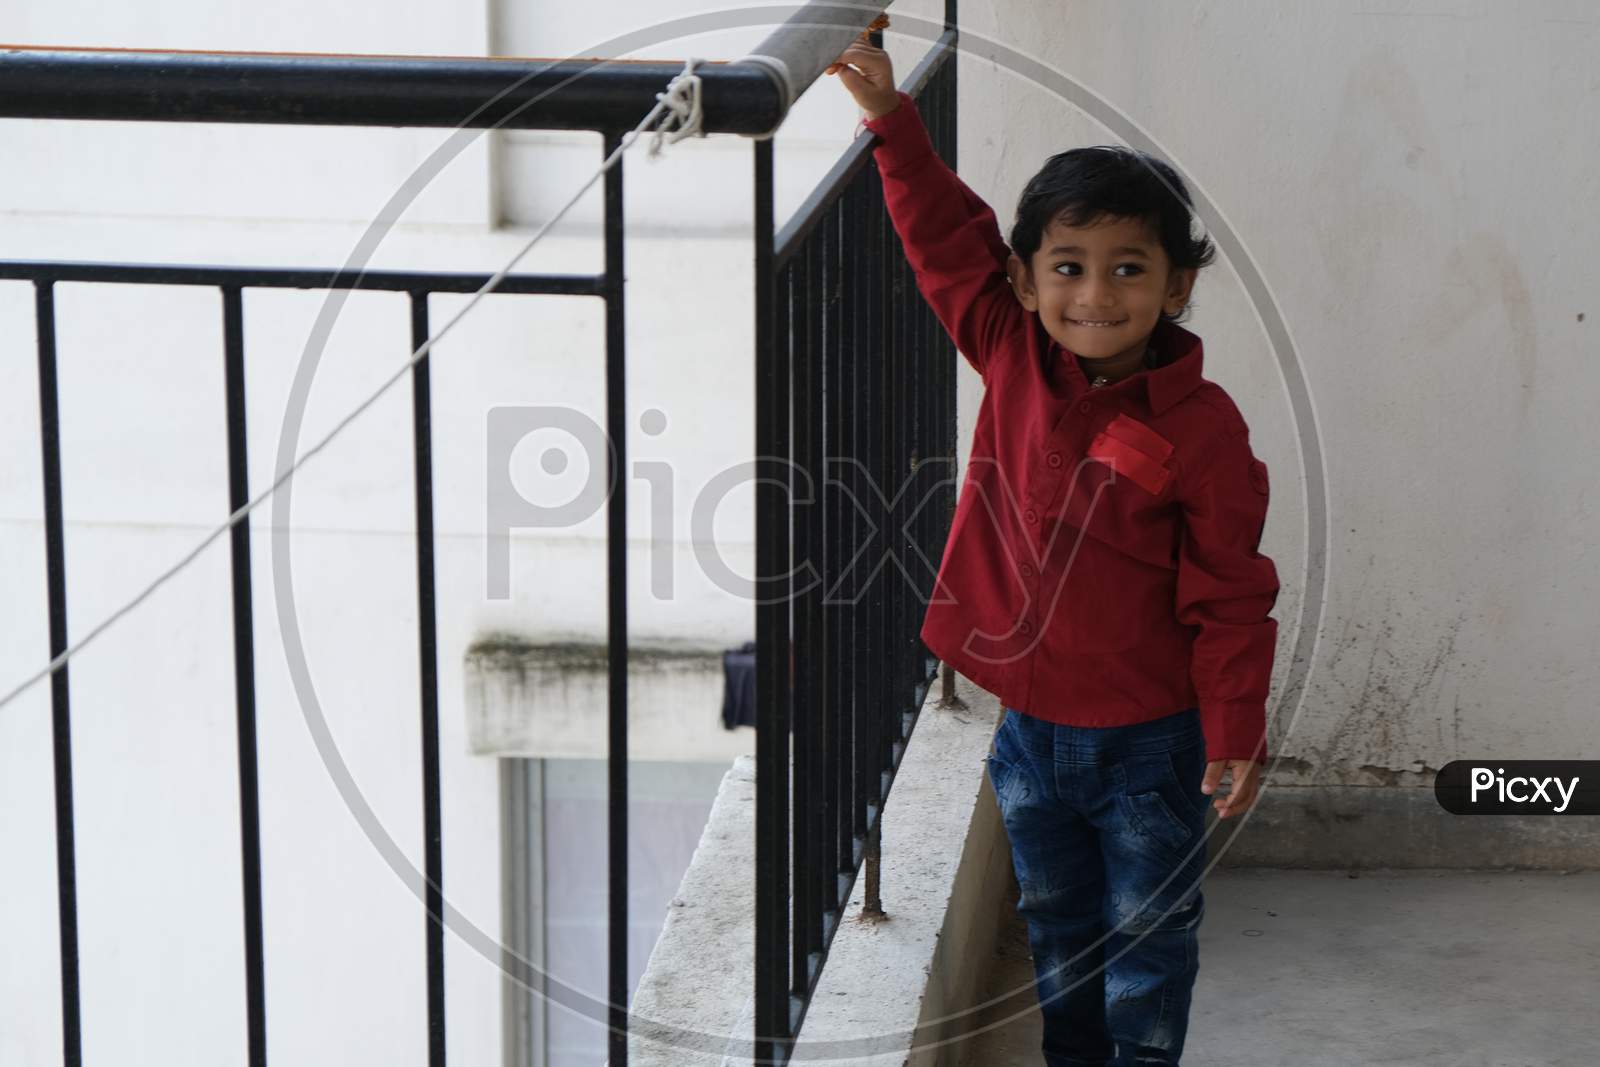 Portrait of Indian cute little cheerful brunette Tamil baby boy wearing vibrant red shirt while standing on a balcony in a white urban background. Indian lifestyle.